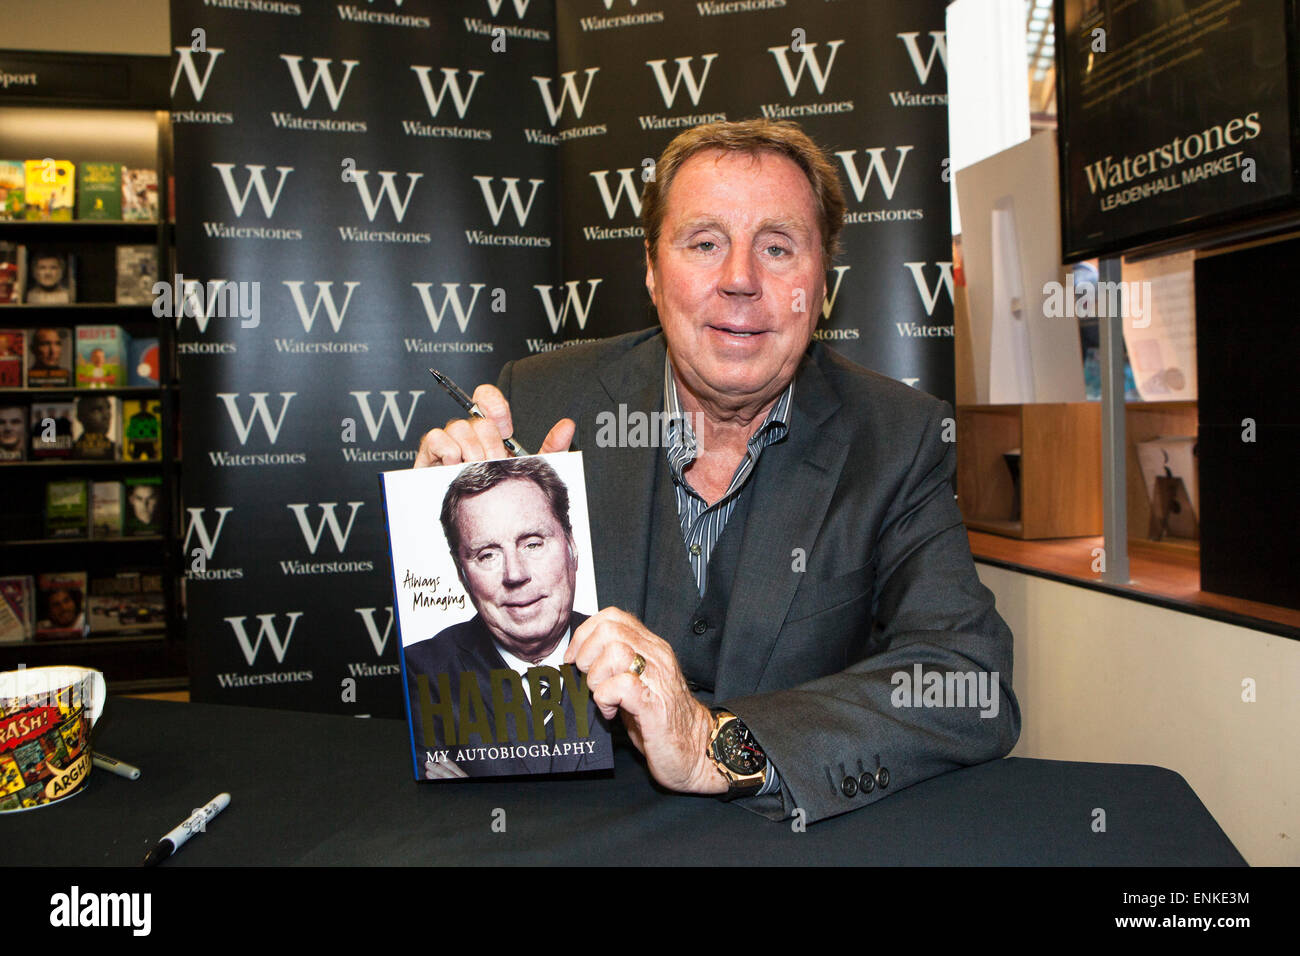 Football manager Harry Redknapp signs copies of his autobiography 'Always Managing' at Waterstones, Leadenhall Market in London. Stock Photo